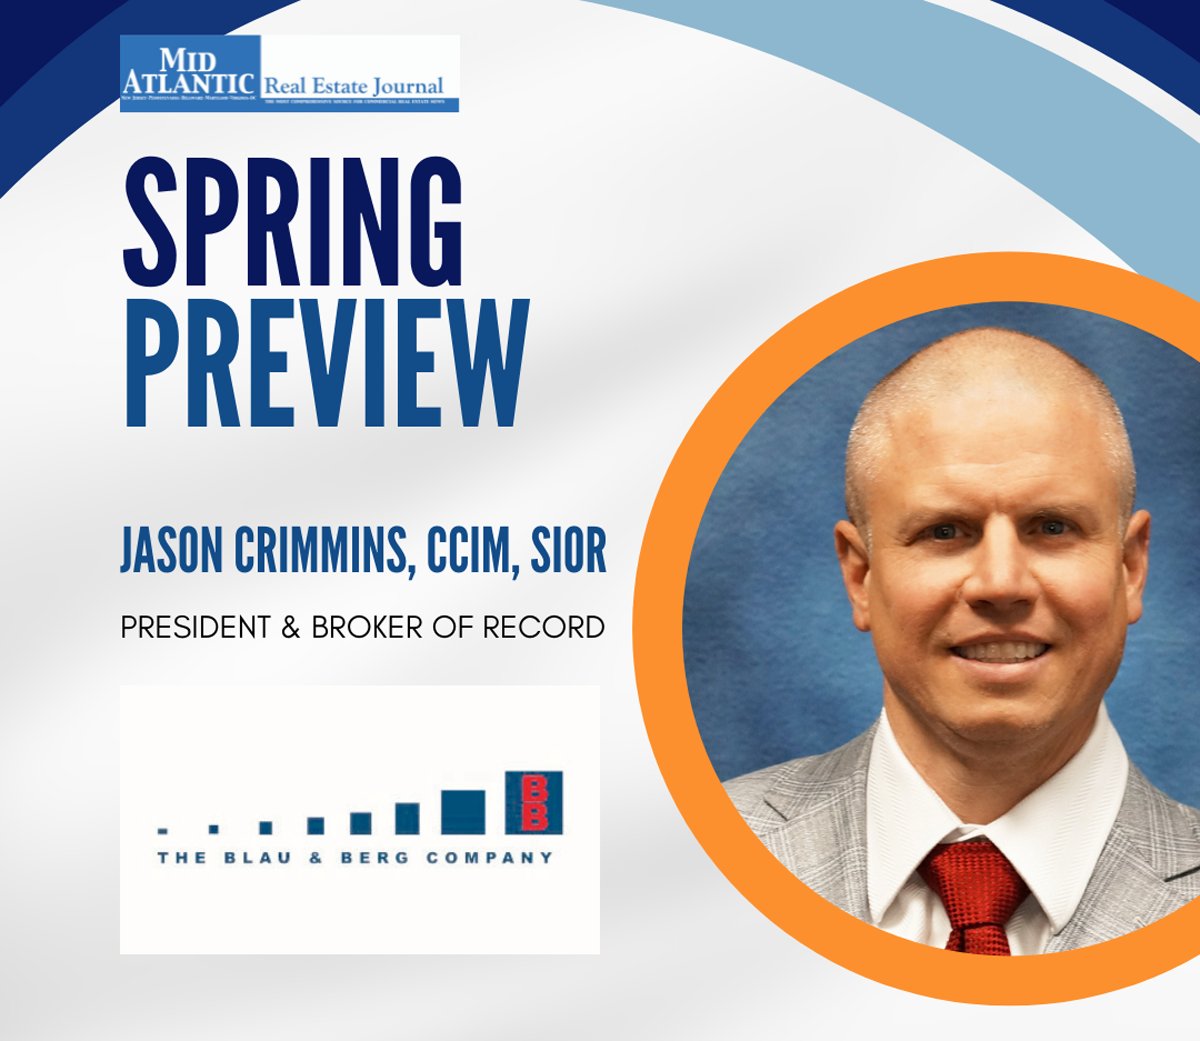 Explore the evolving landscape of #CRE in 2024 with Jason Crimmins, CCIM, SIOR, from @BlauBergCompany. Learn about the market adjustments and the vision for 2025 in #MAREJ Spring Preview Spotlight. tinyurl.com/Crimmins-Spring #industrial